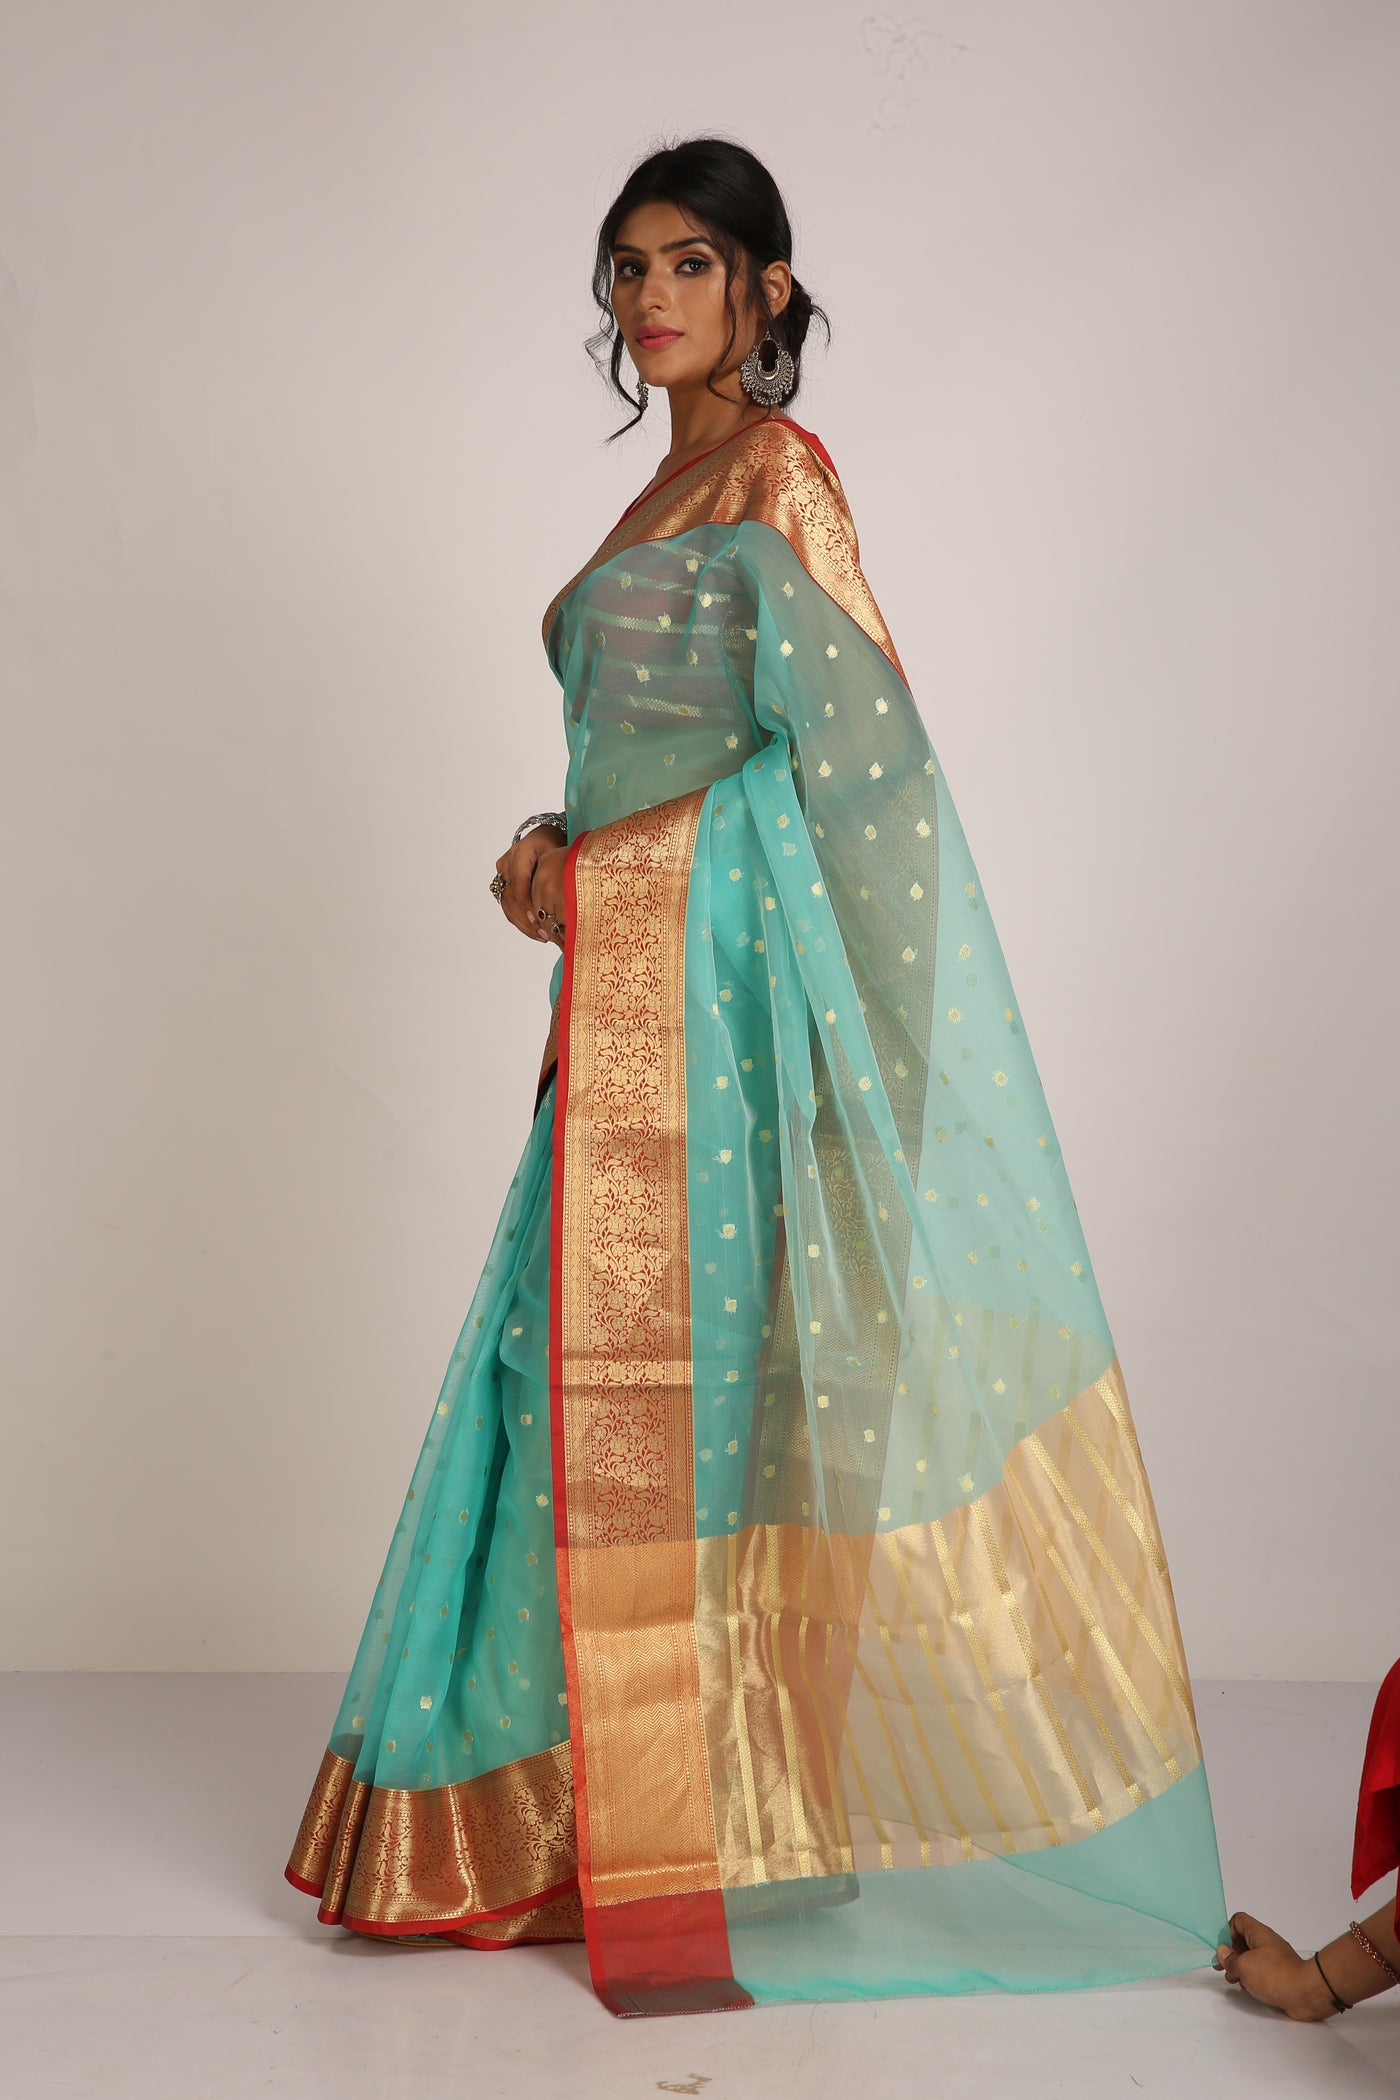 Sea Green Silk Saree - Indian Clothing in Denver, CO, Aurora, CO, Boulder, CO, Fort Collins, CO, Colorado Springs, CO, Parker, CO, Highlands Ranch, CO, Cherry Creek, CO, Centennial, CO, and Longmont, CO. Nationwide shipping USA - India Fashion X